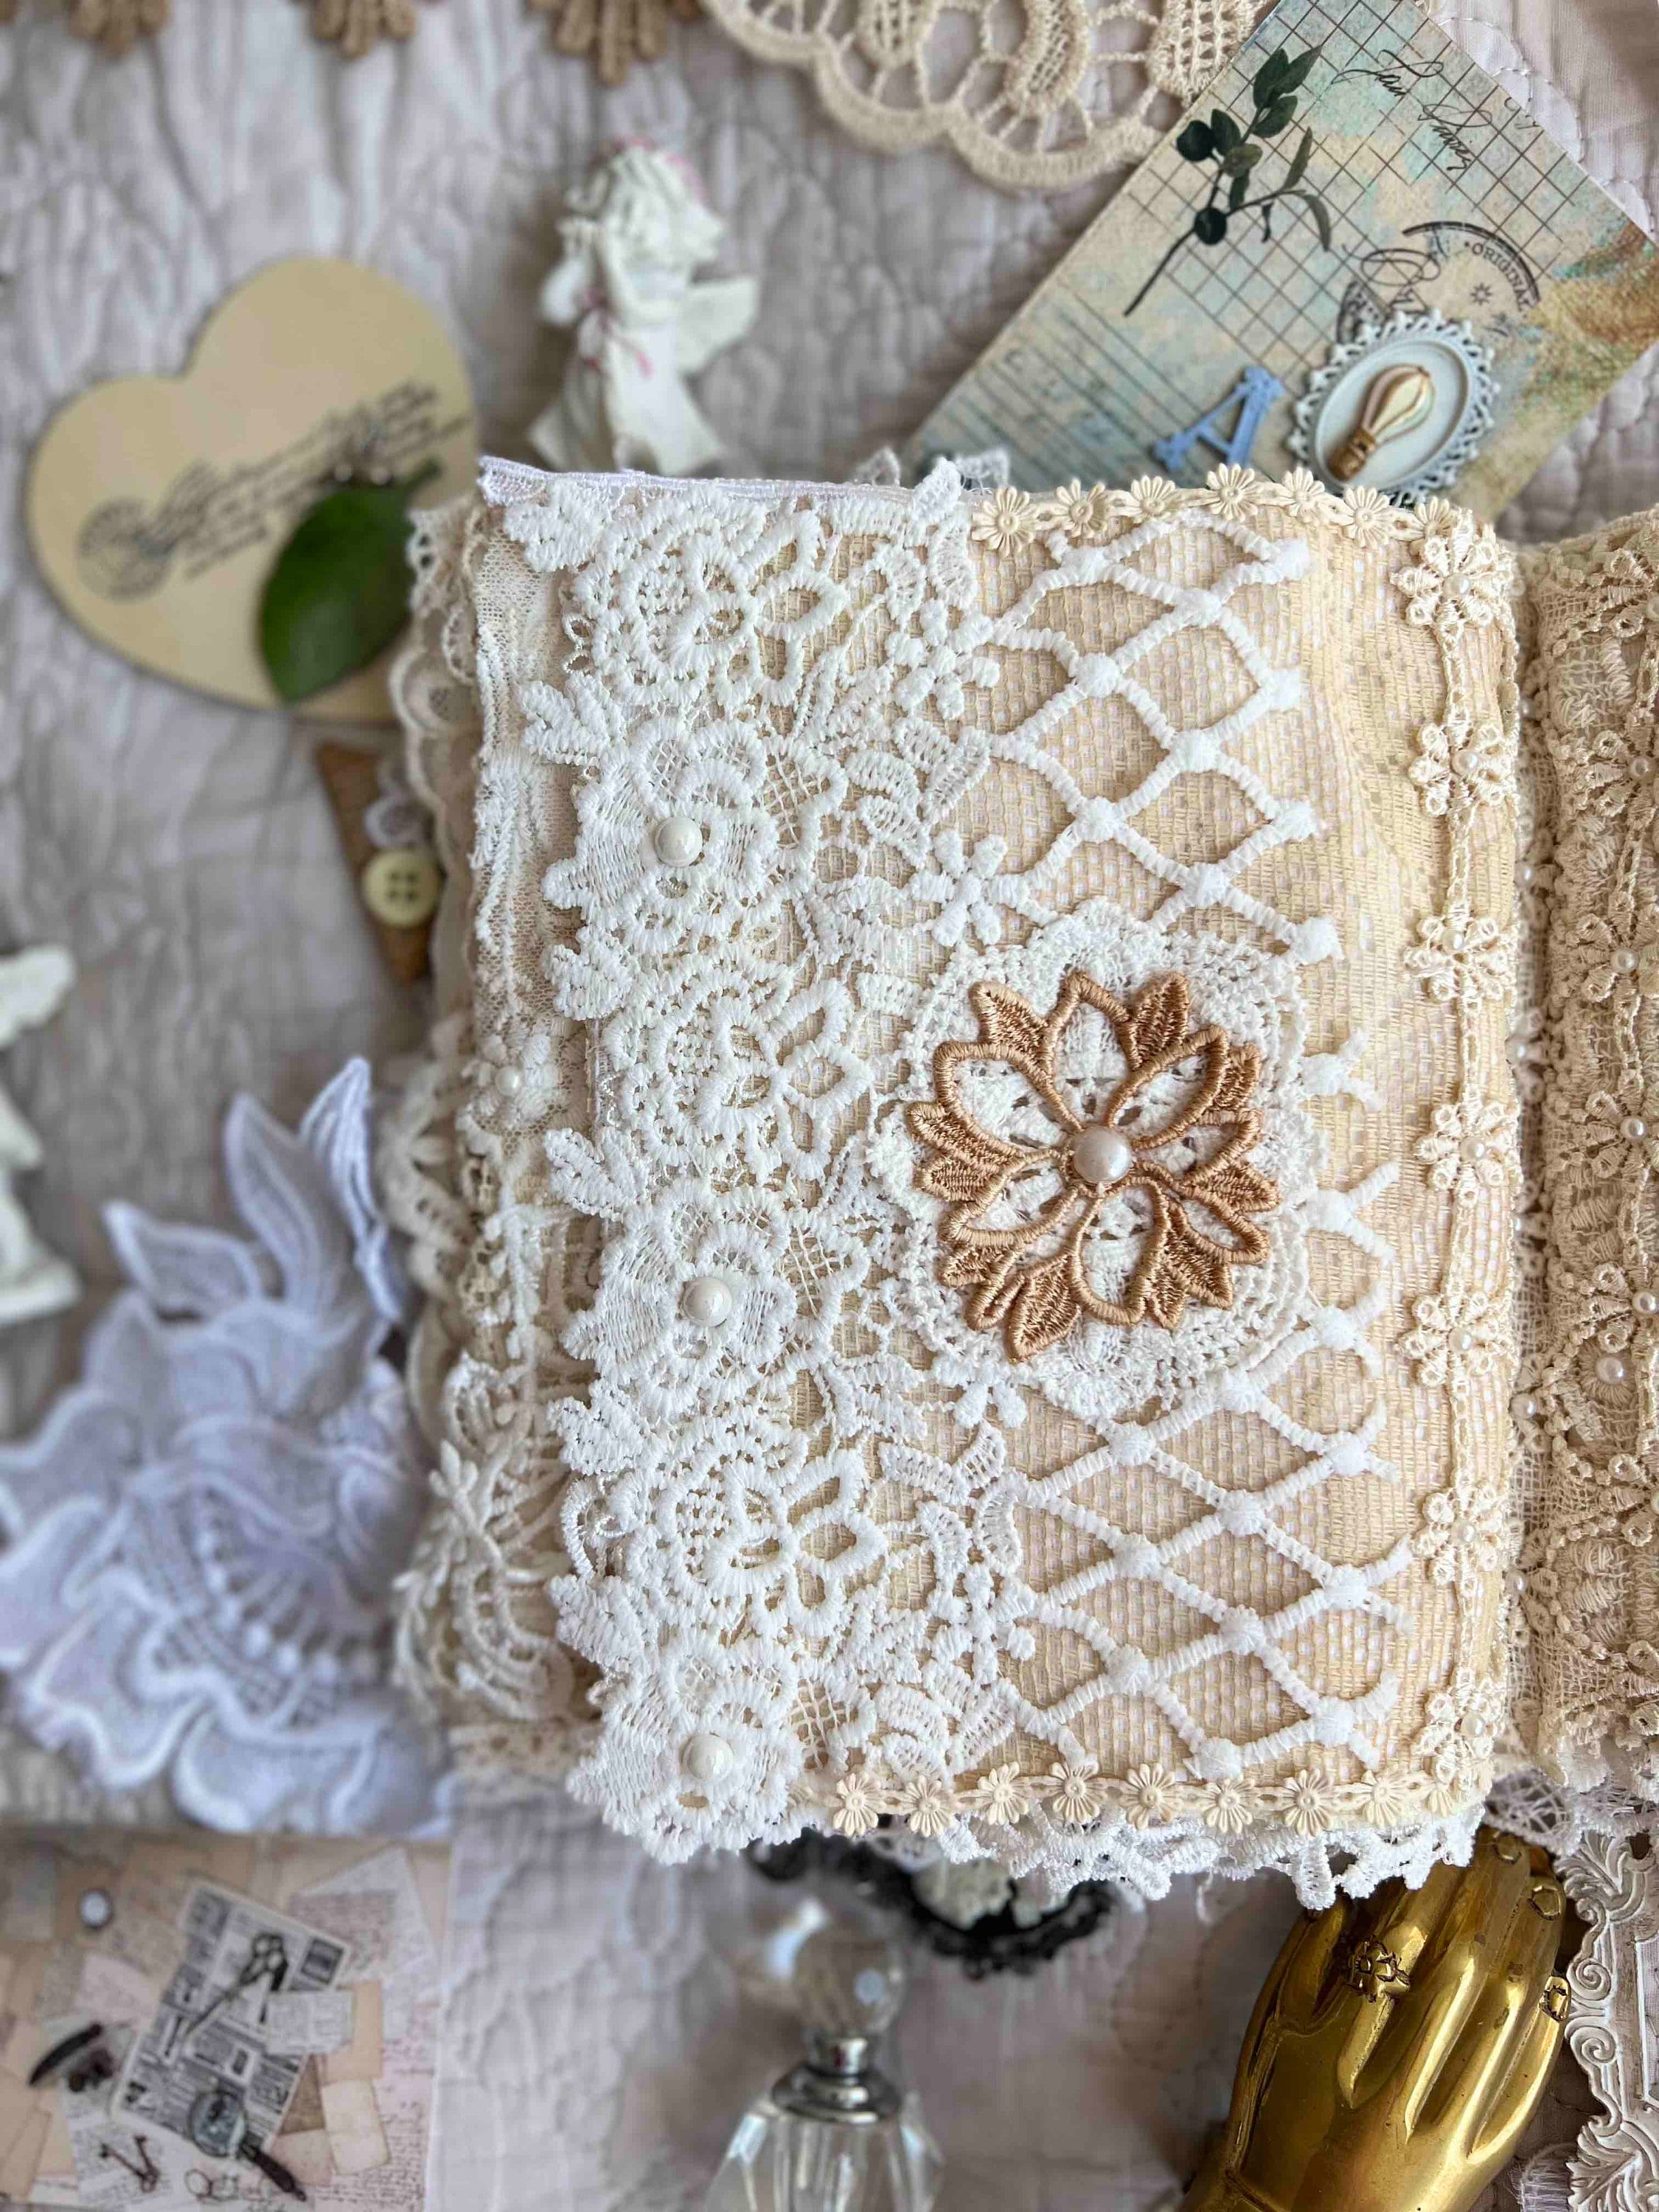 Fabric Book Vintage Crochet and Lace Fabric Book Junk - Etsy